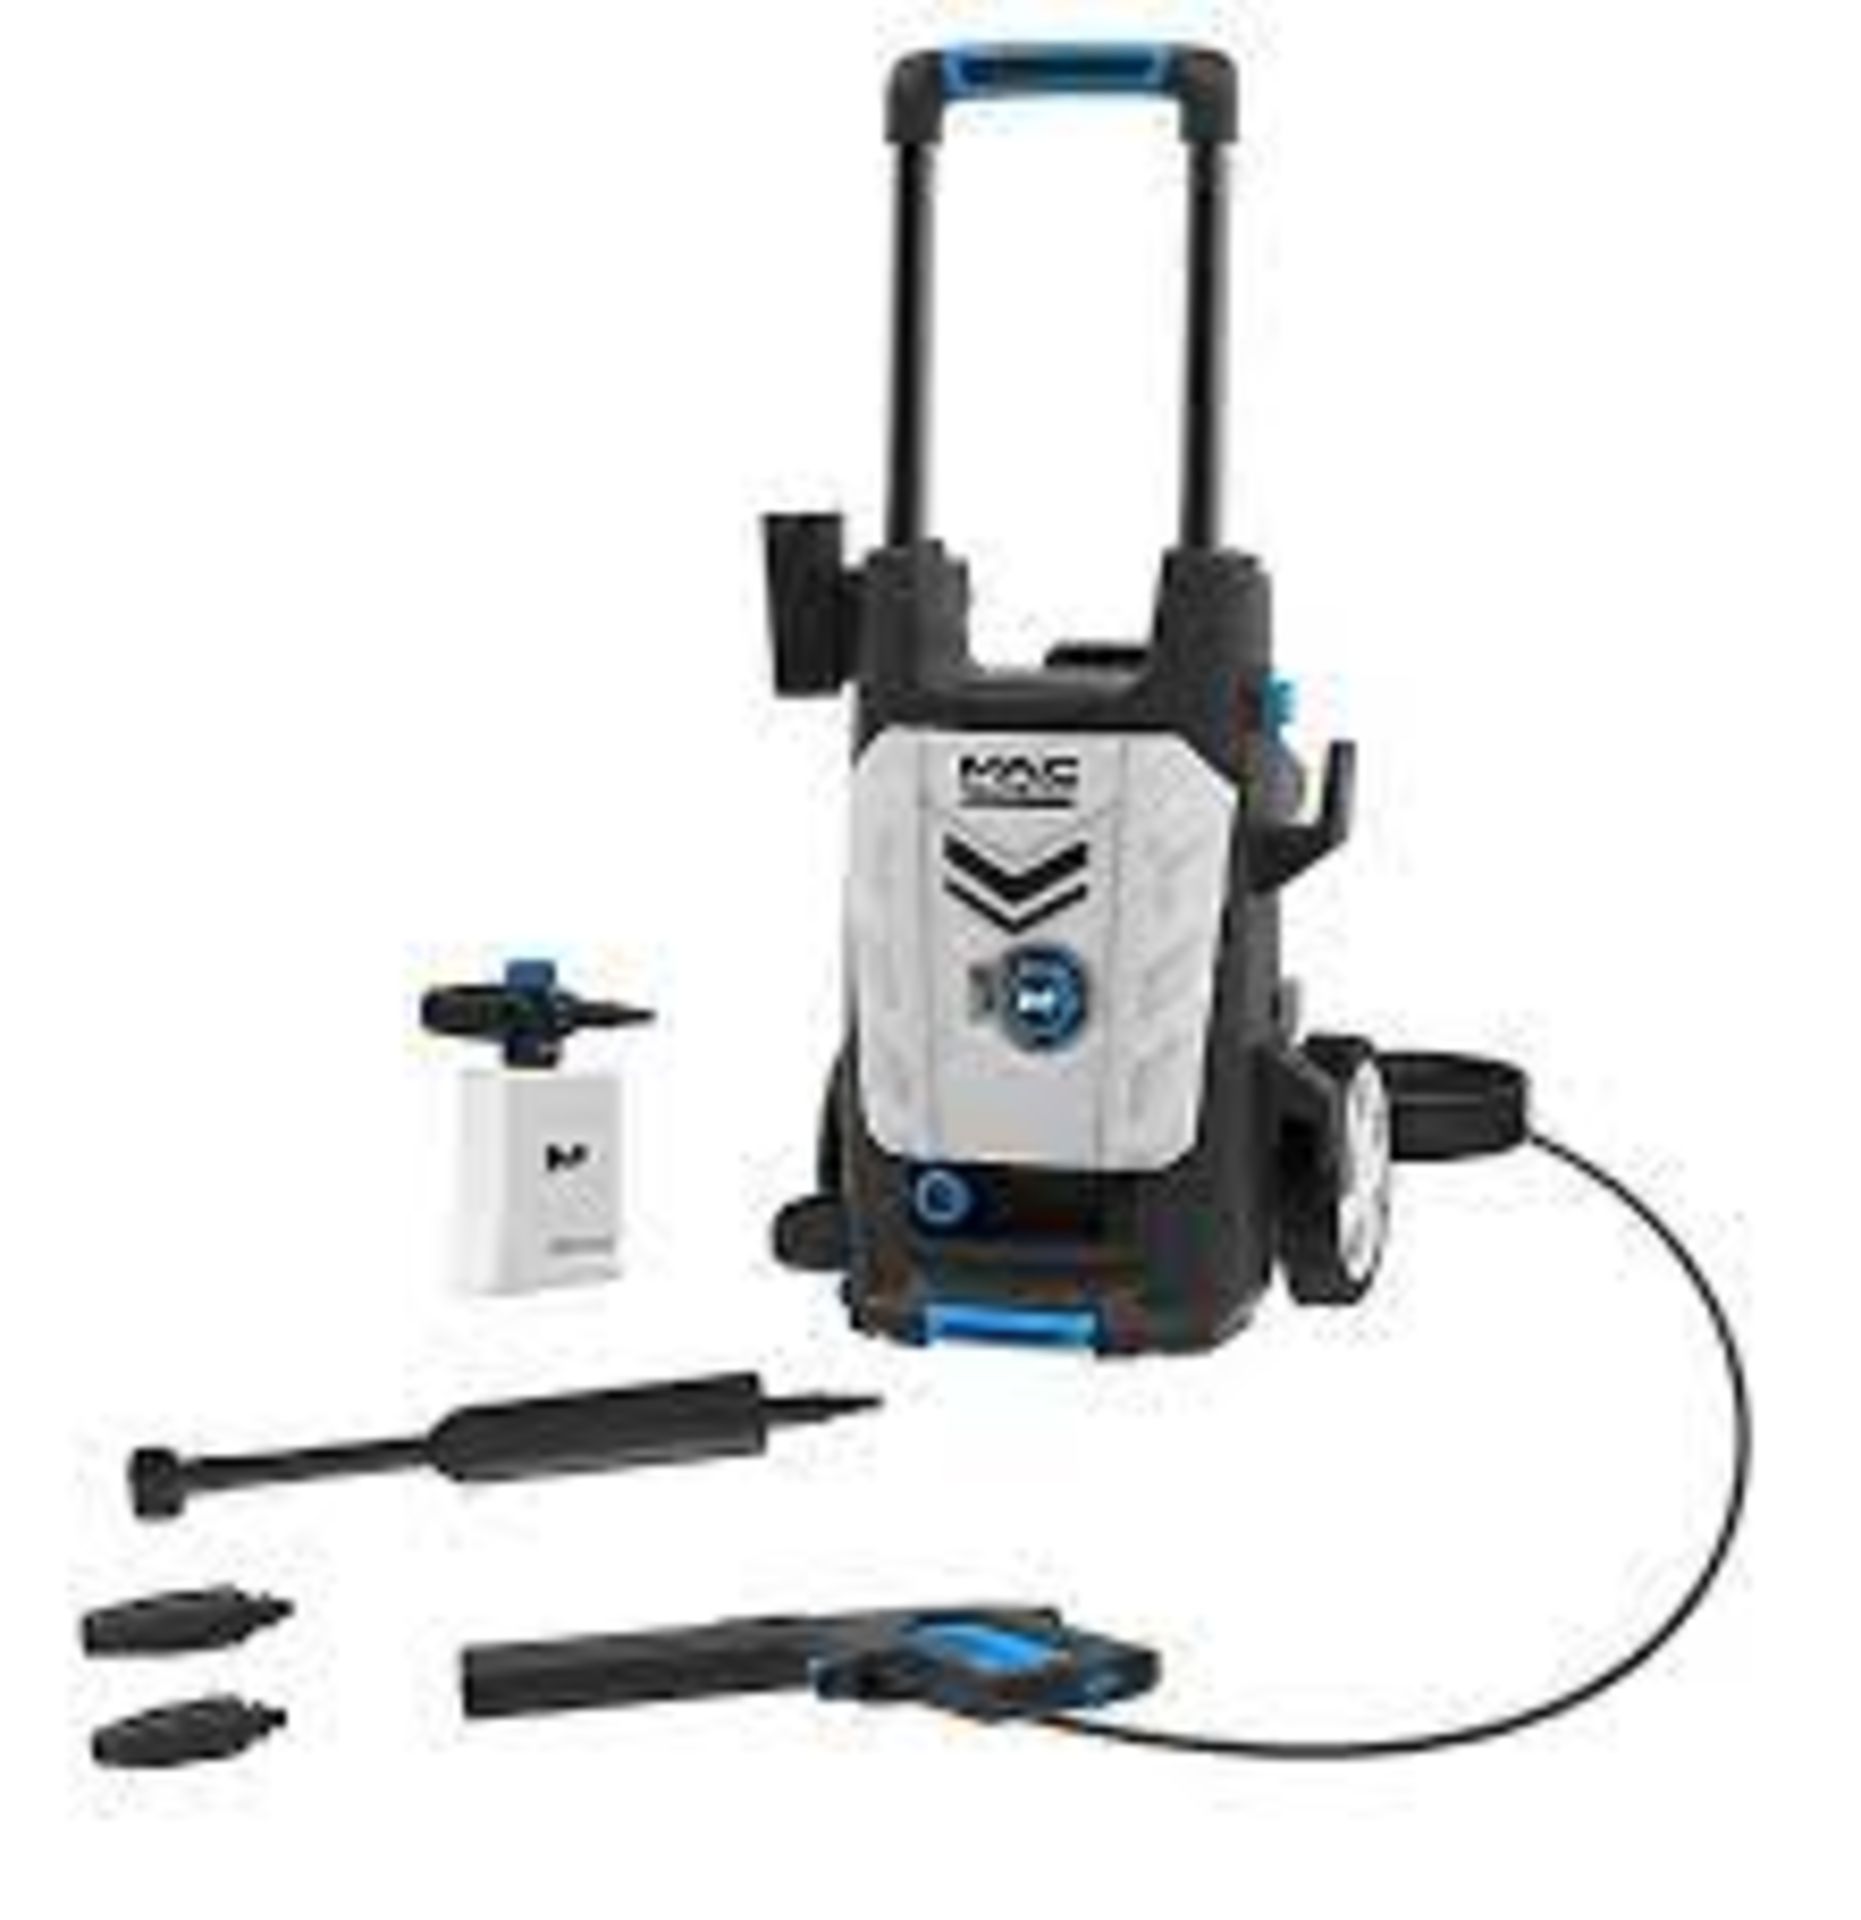 Mac Allister Corded Pressure washer 1.8kW MPWP1800-3. - BI. The compact design makes for practical